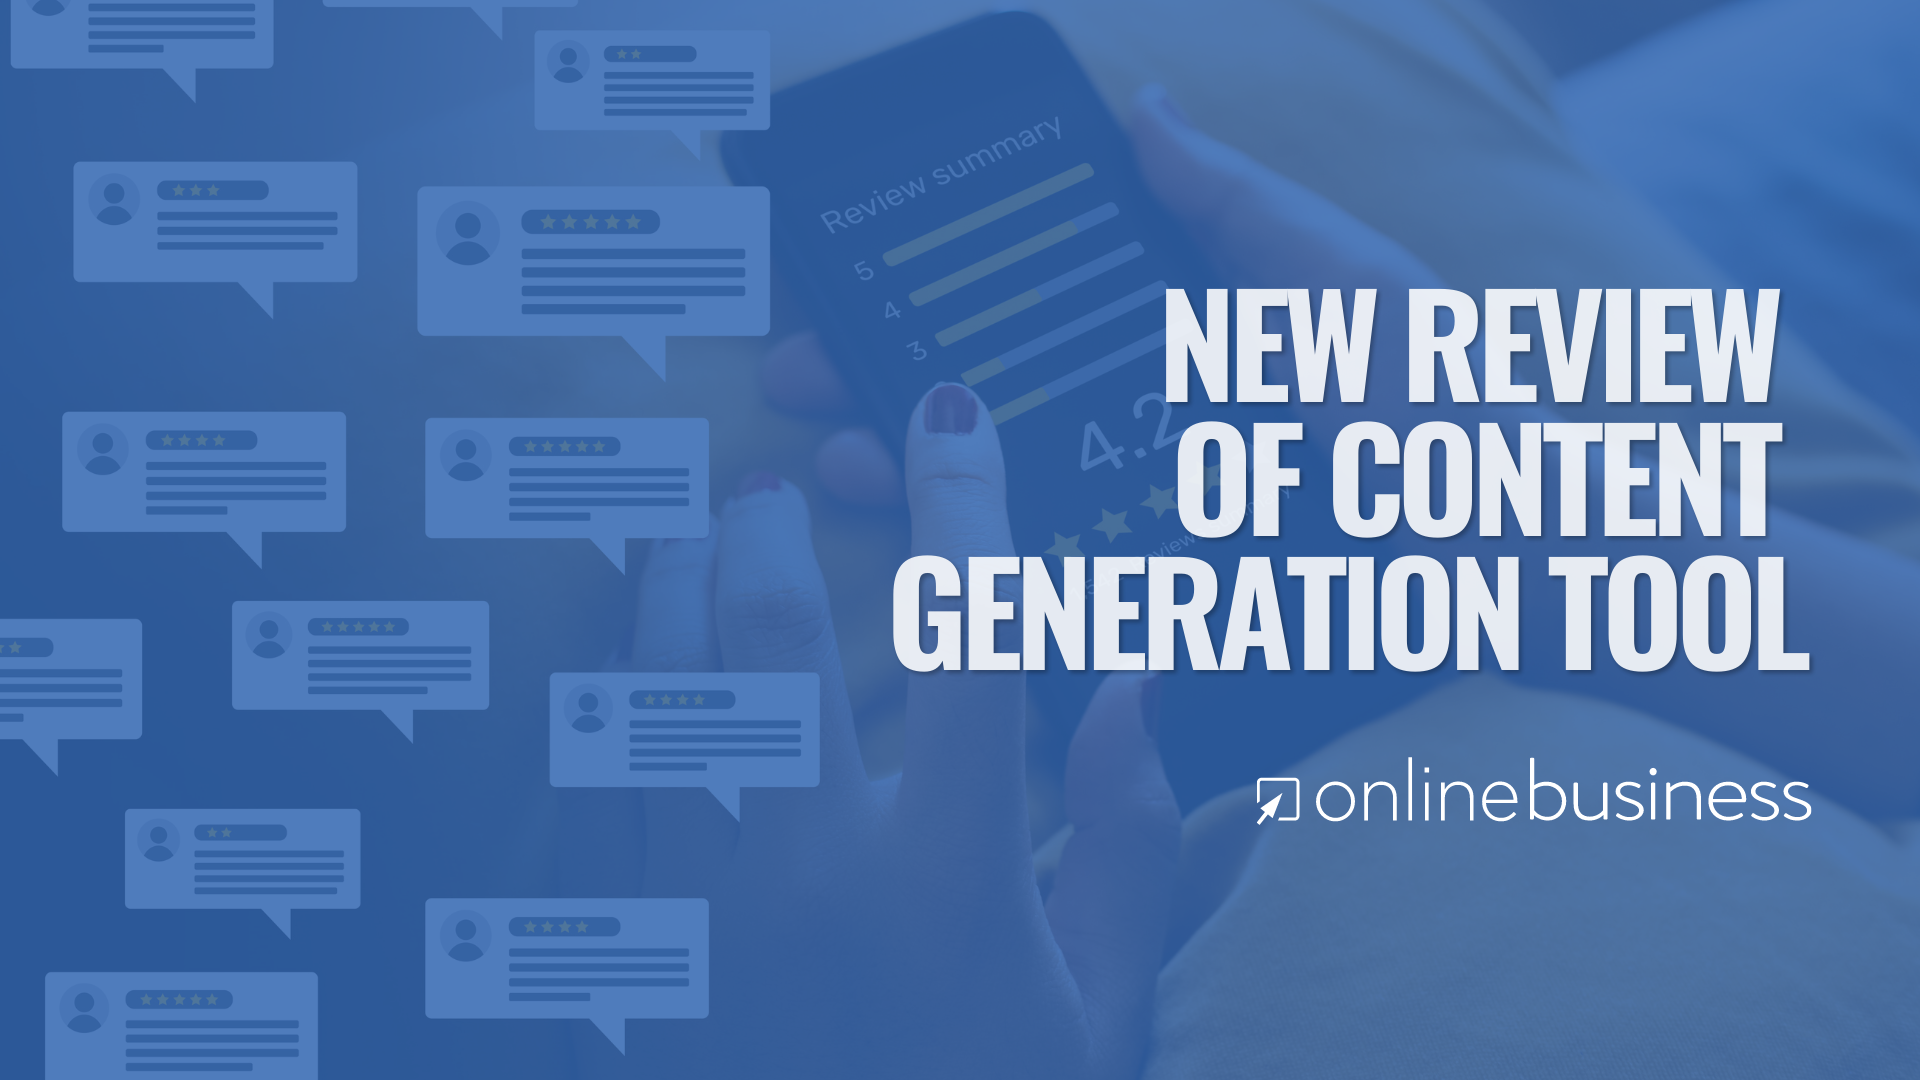 OnlineBusiness.com Releases New Review of Content Generation Tool